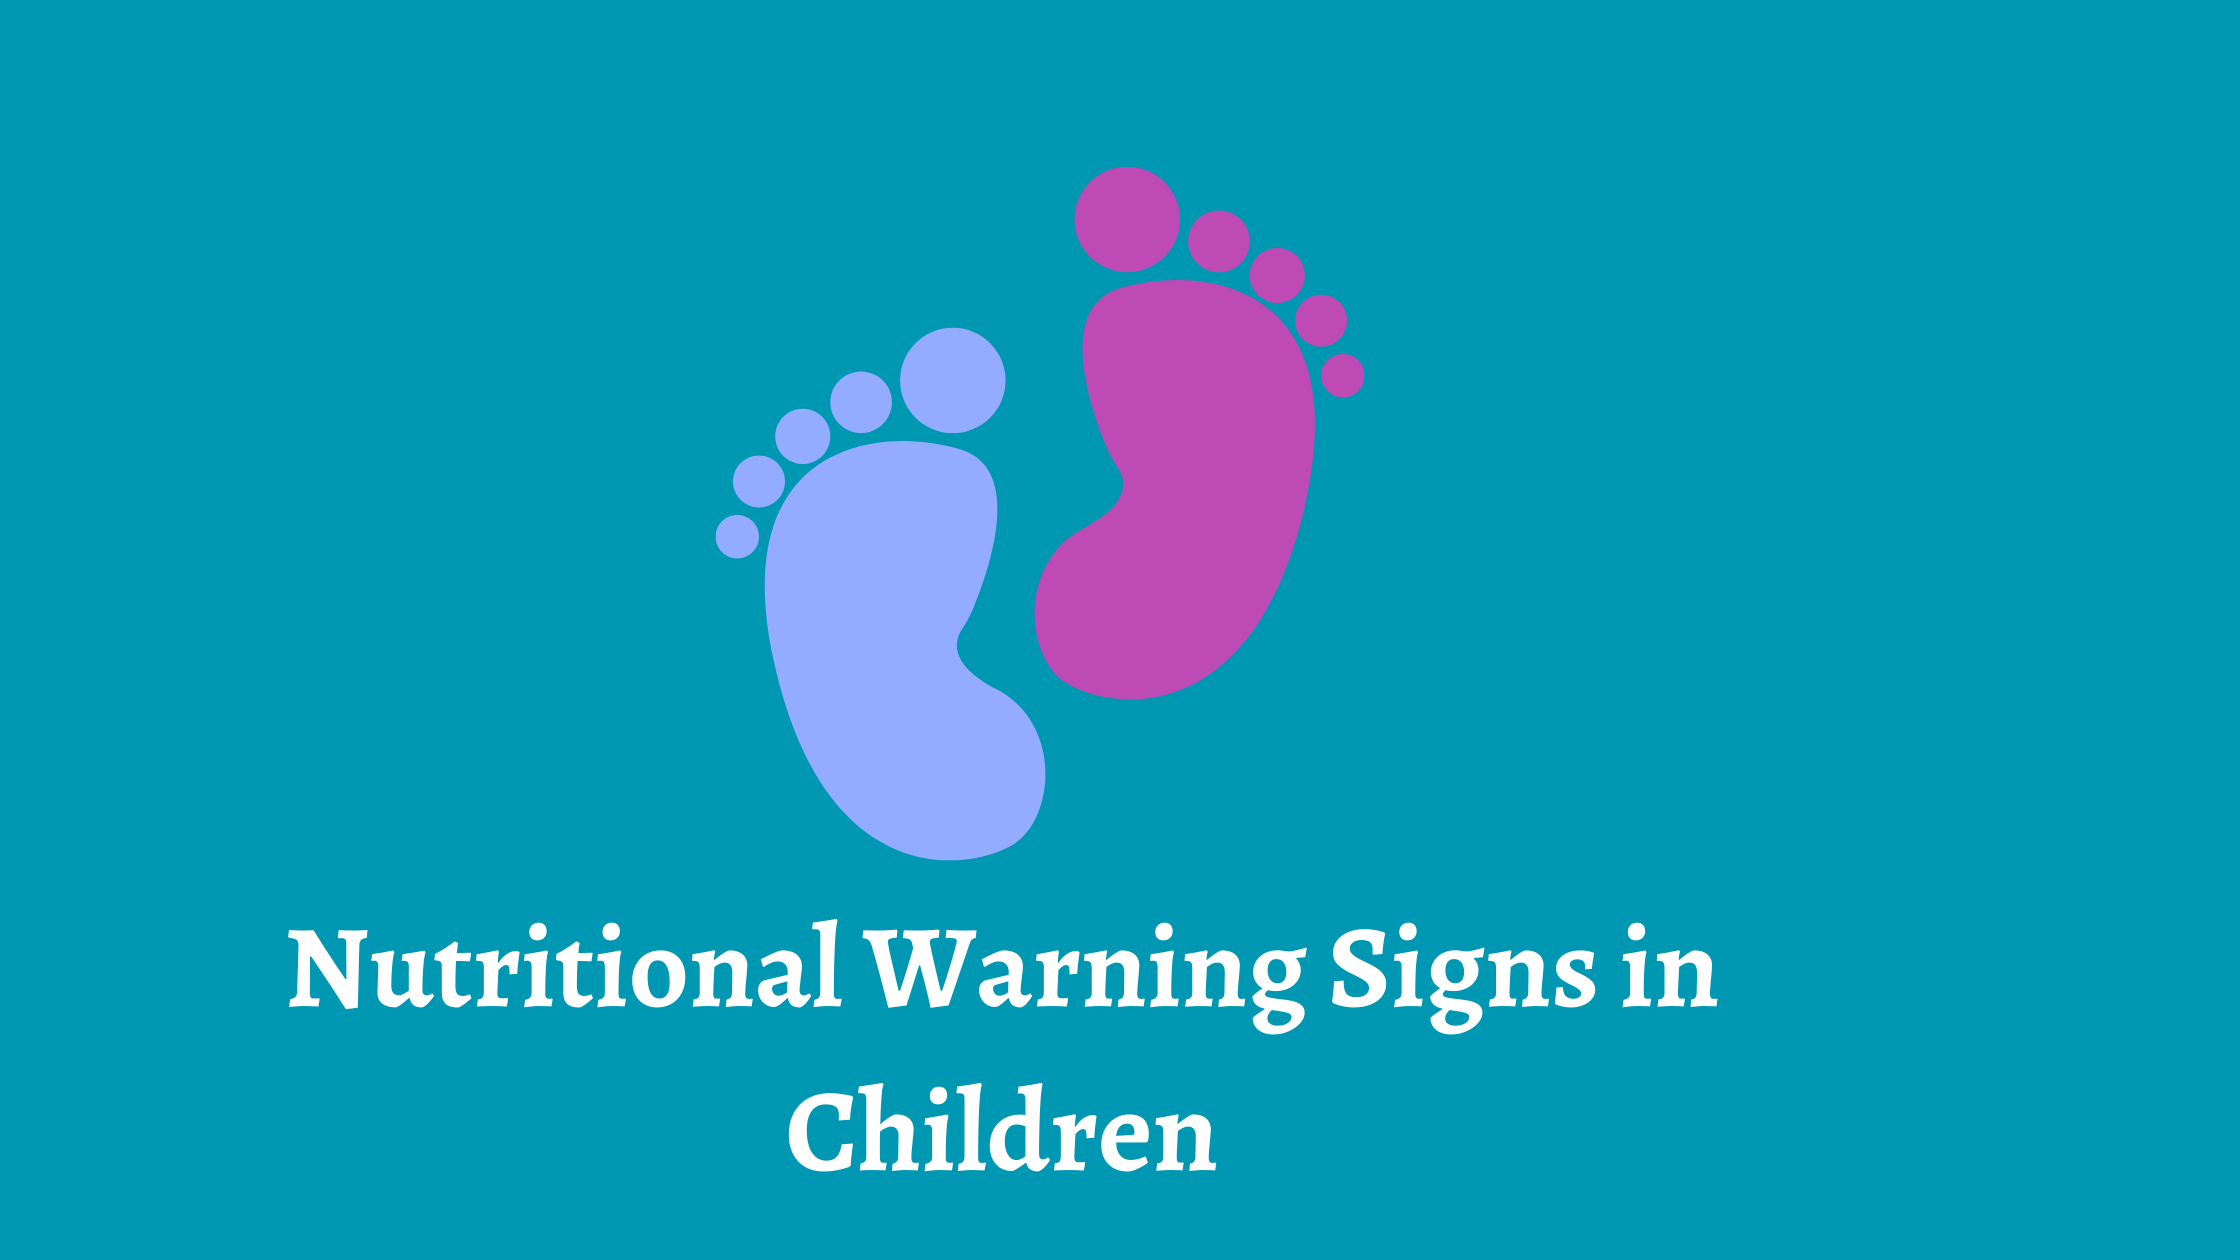 Nutritional Warning Signs in Children